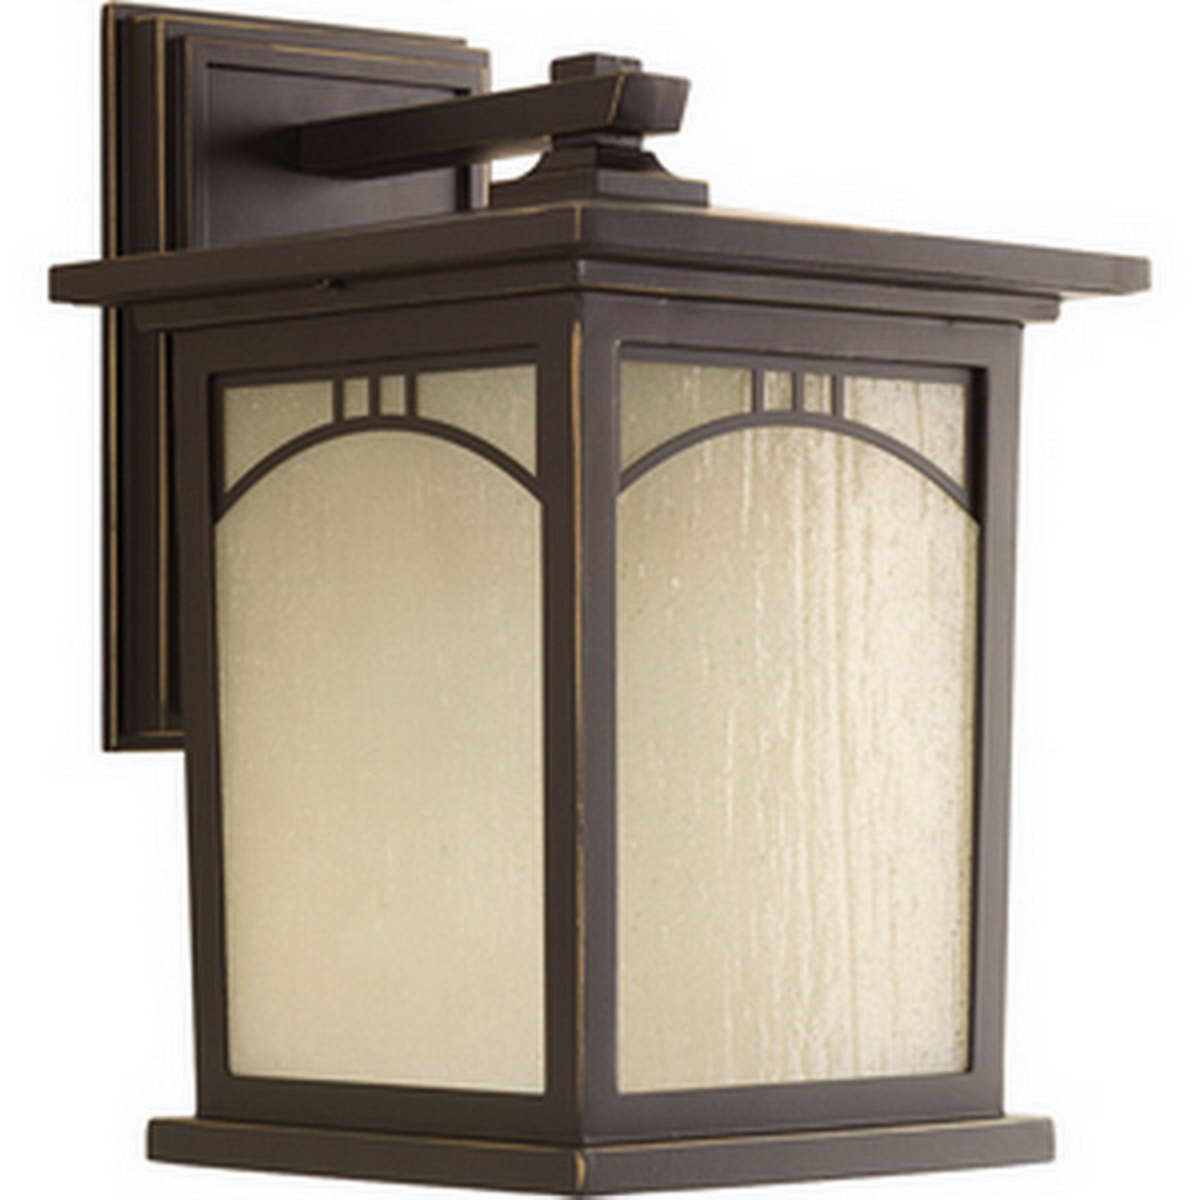 Residence 12 in. Outdoor Wall Light Bronze Finish